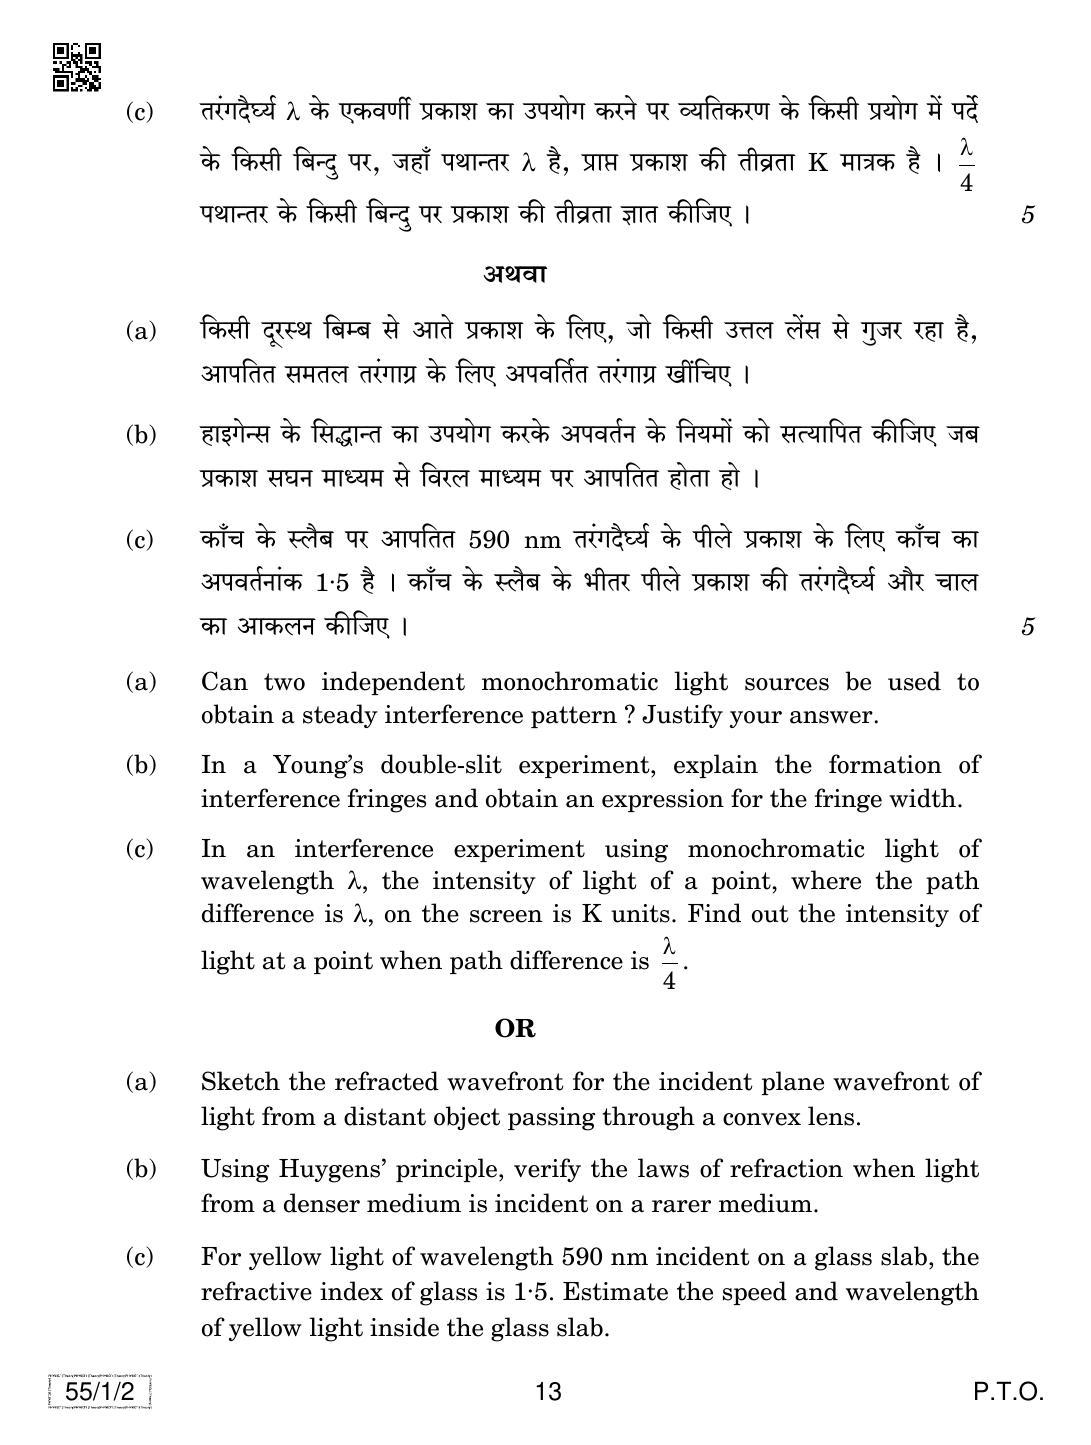 CBSE Class 12 55-1-2 PHYSICS 2019 Compartment Question Paper - Page 13